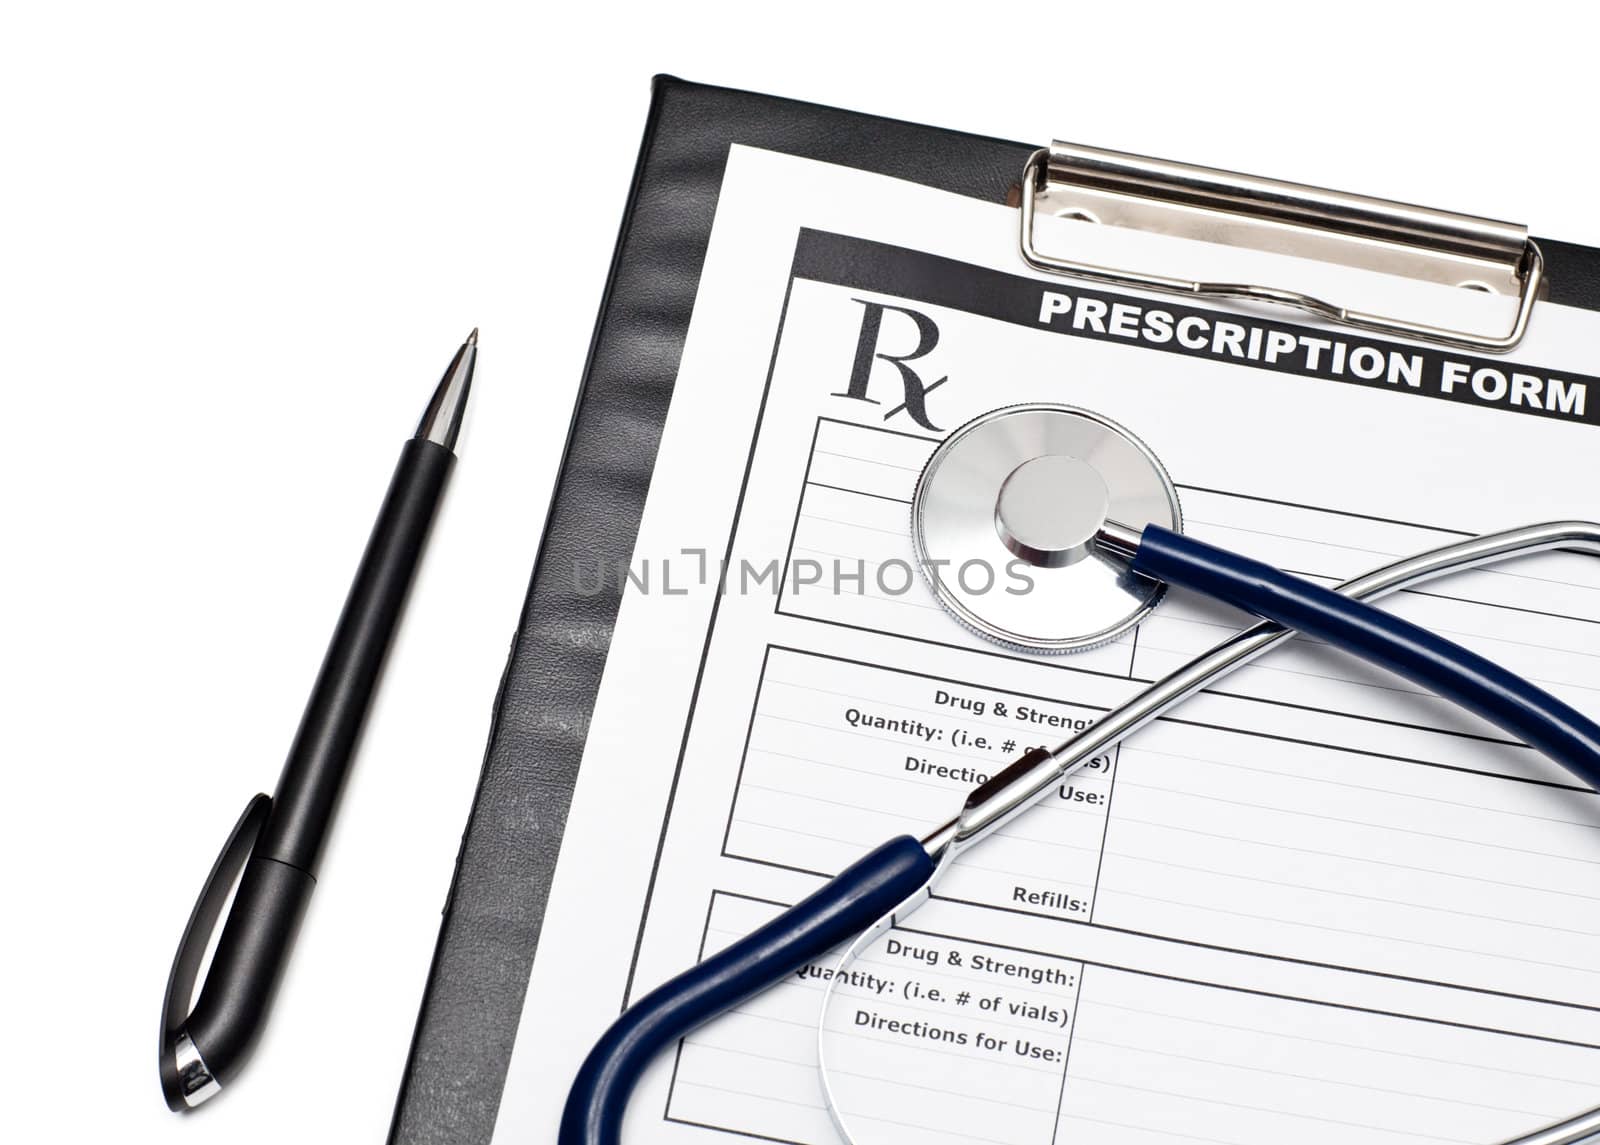 Blank prescription form on clipboard with stethoscope and pen